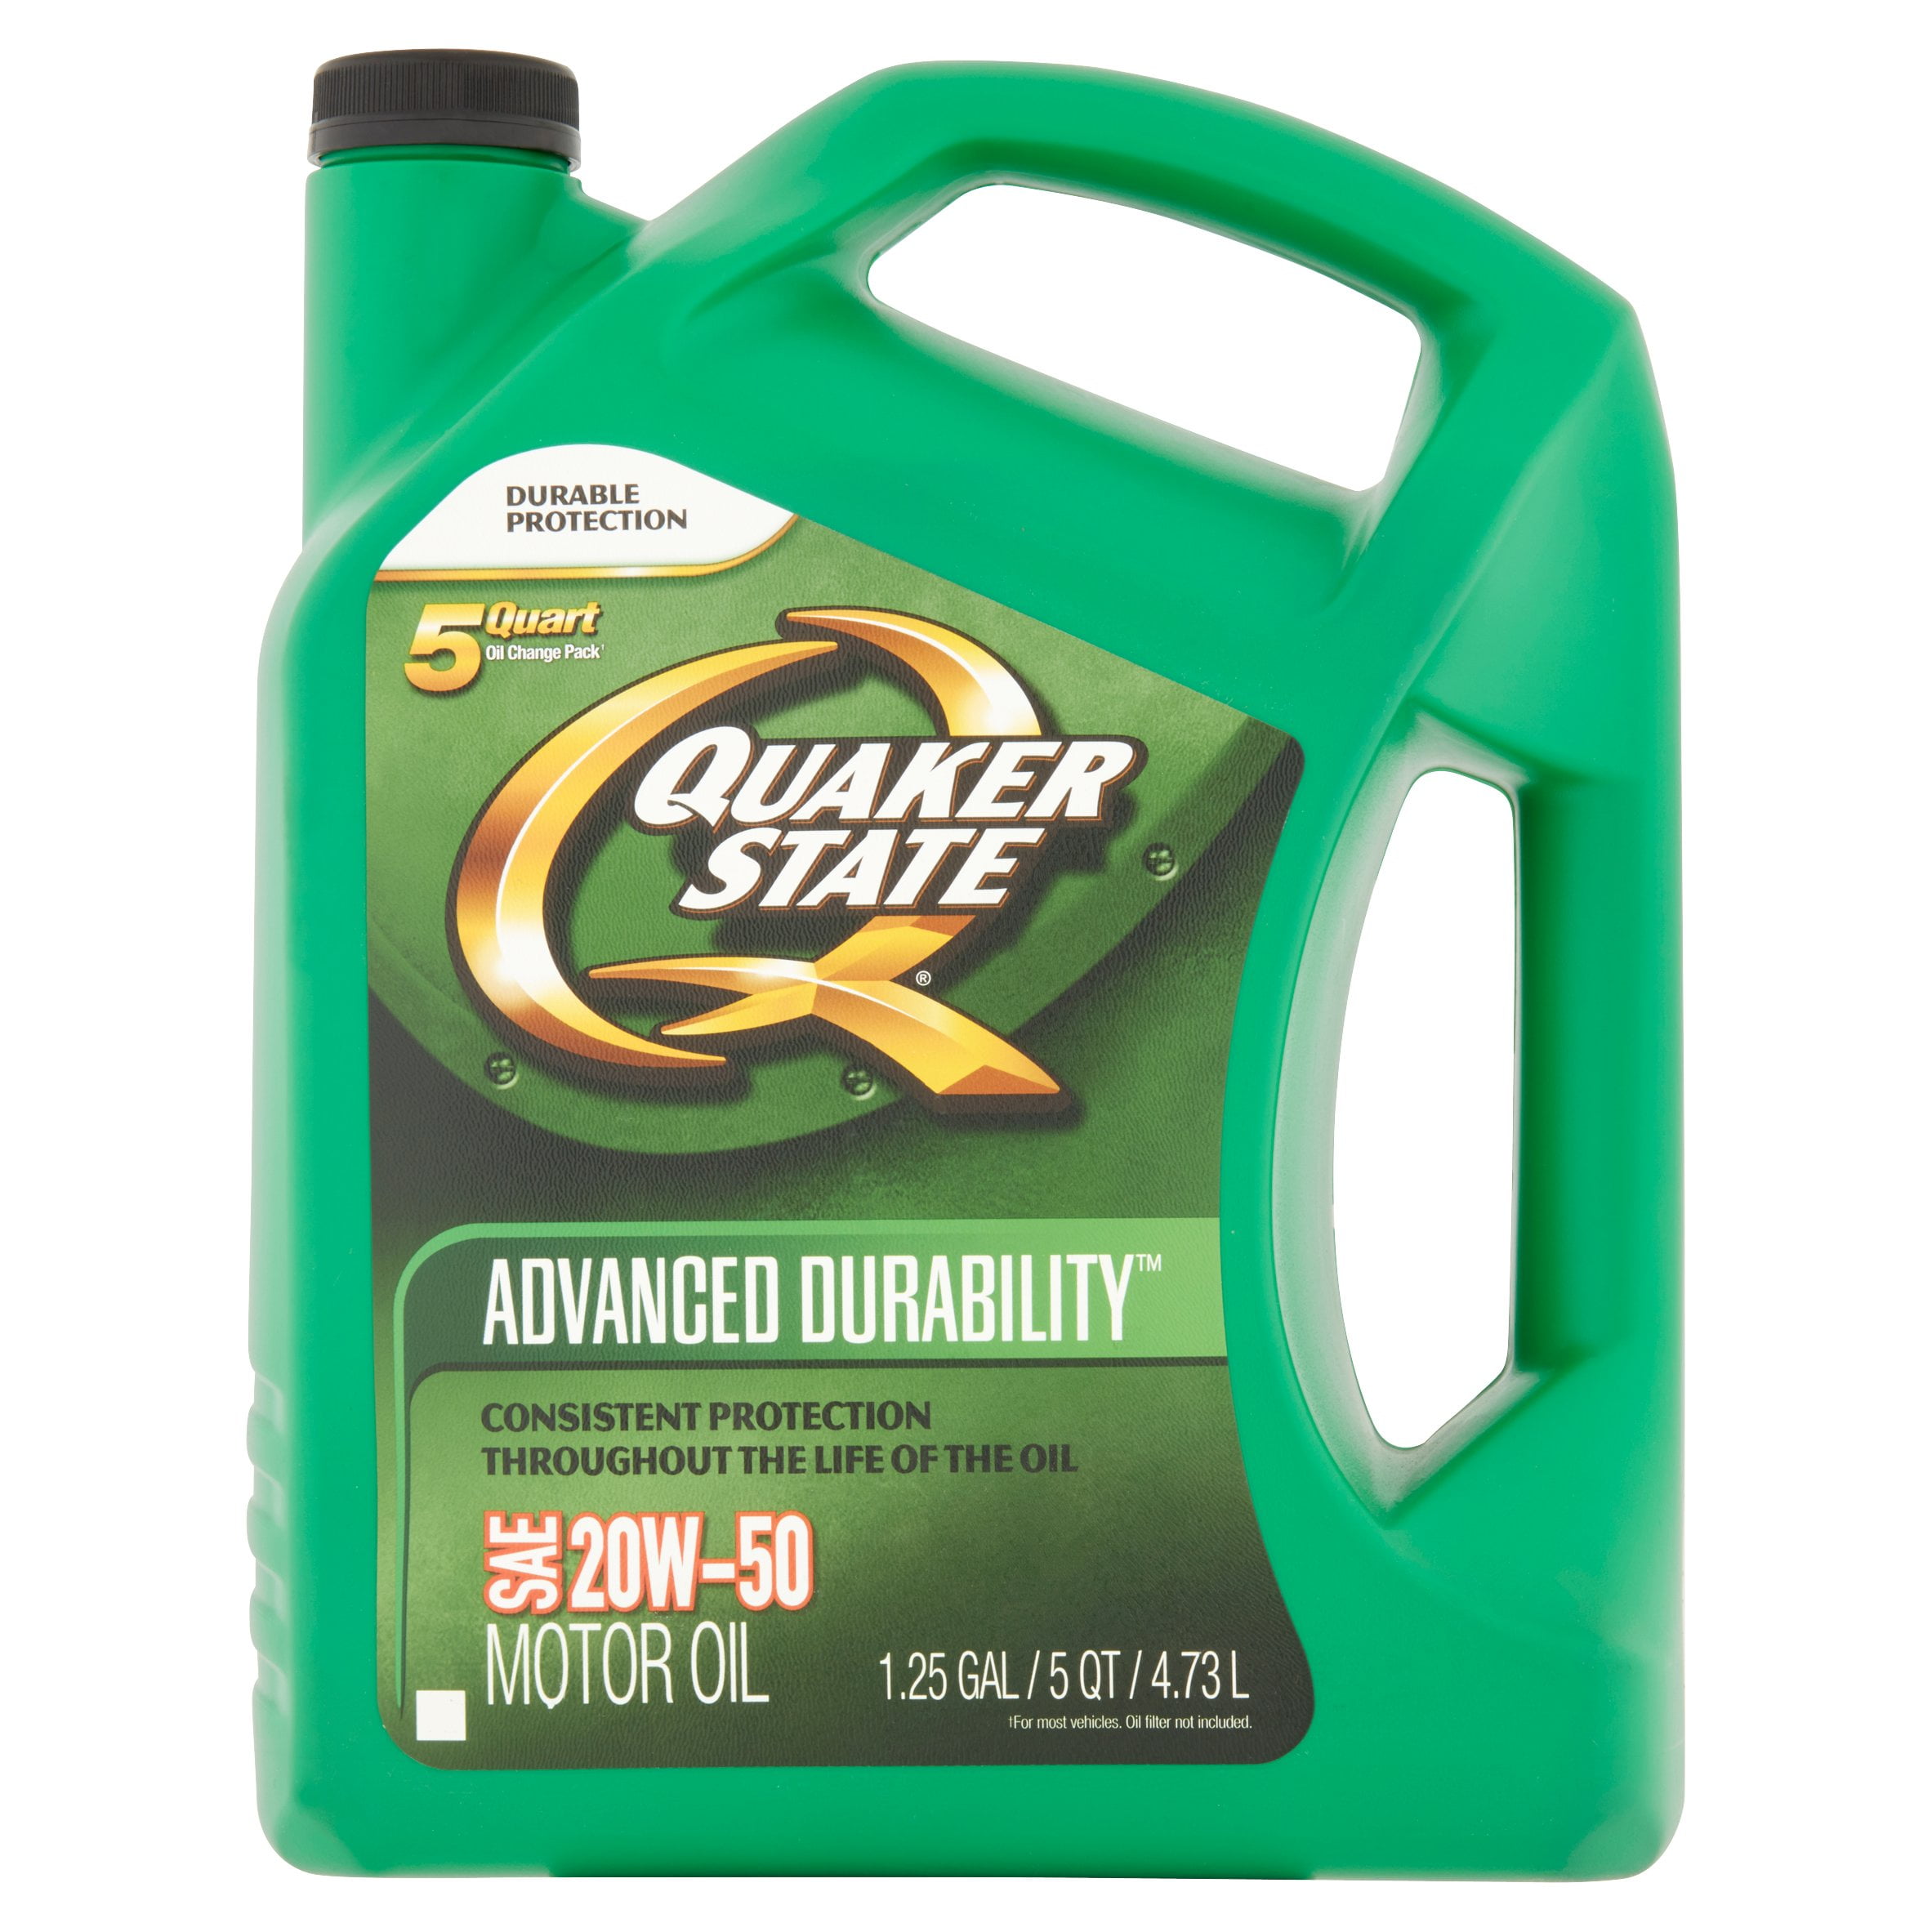 Quaker State Oil Filter Reference Chart